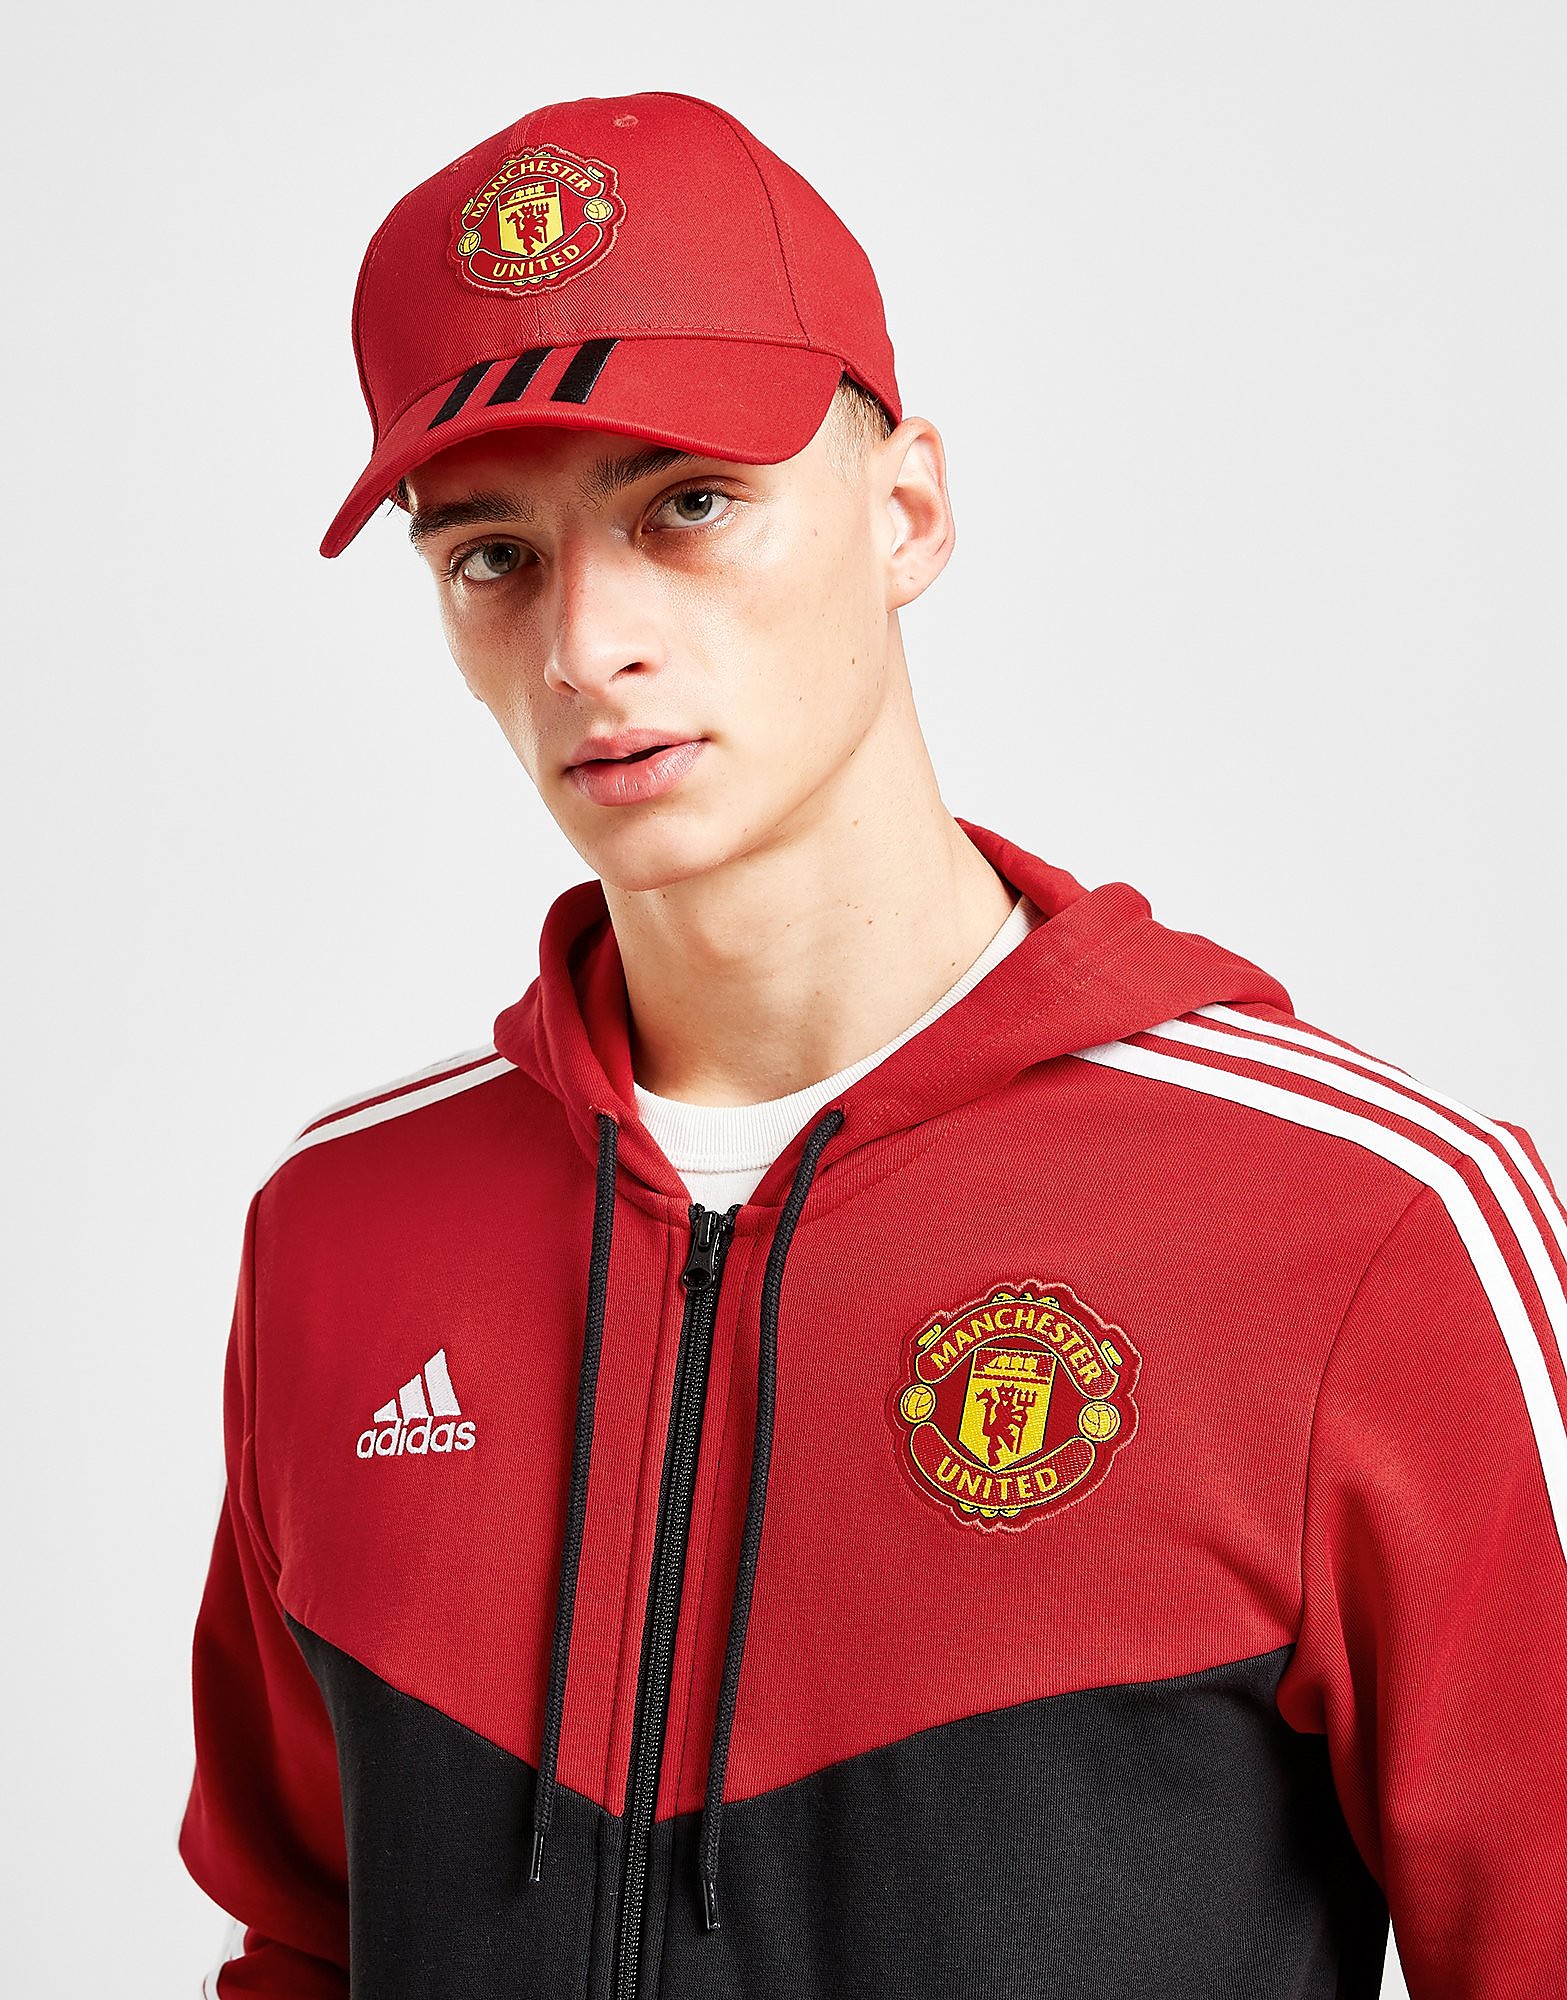 

adidas Manchester United FC Baseball Cap - Real Red / Black / White - Womens, Real Red / Black / White